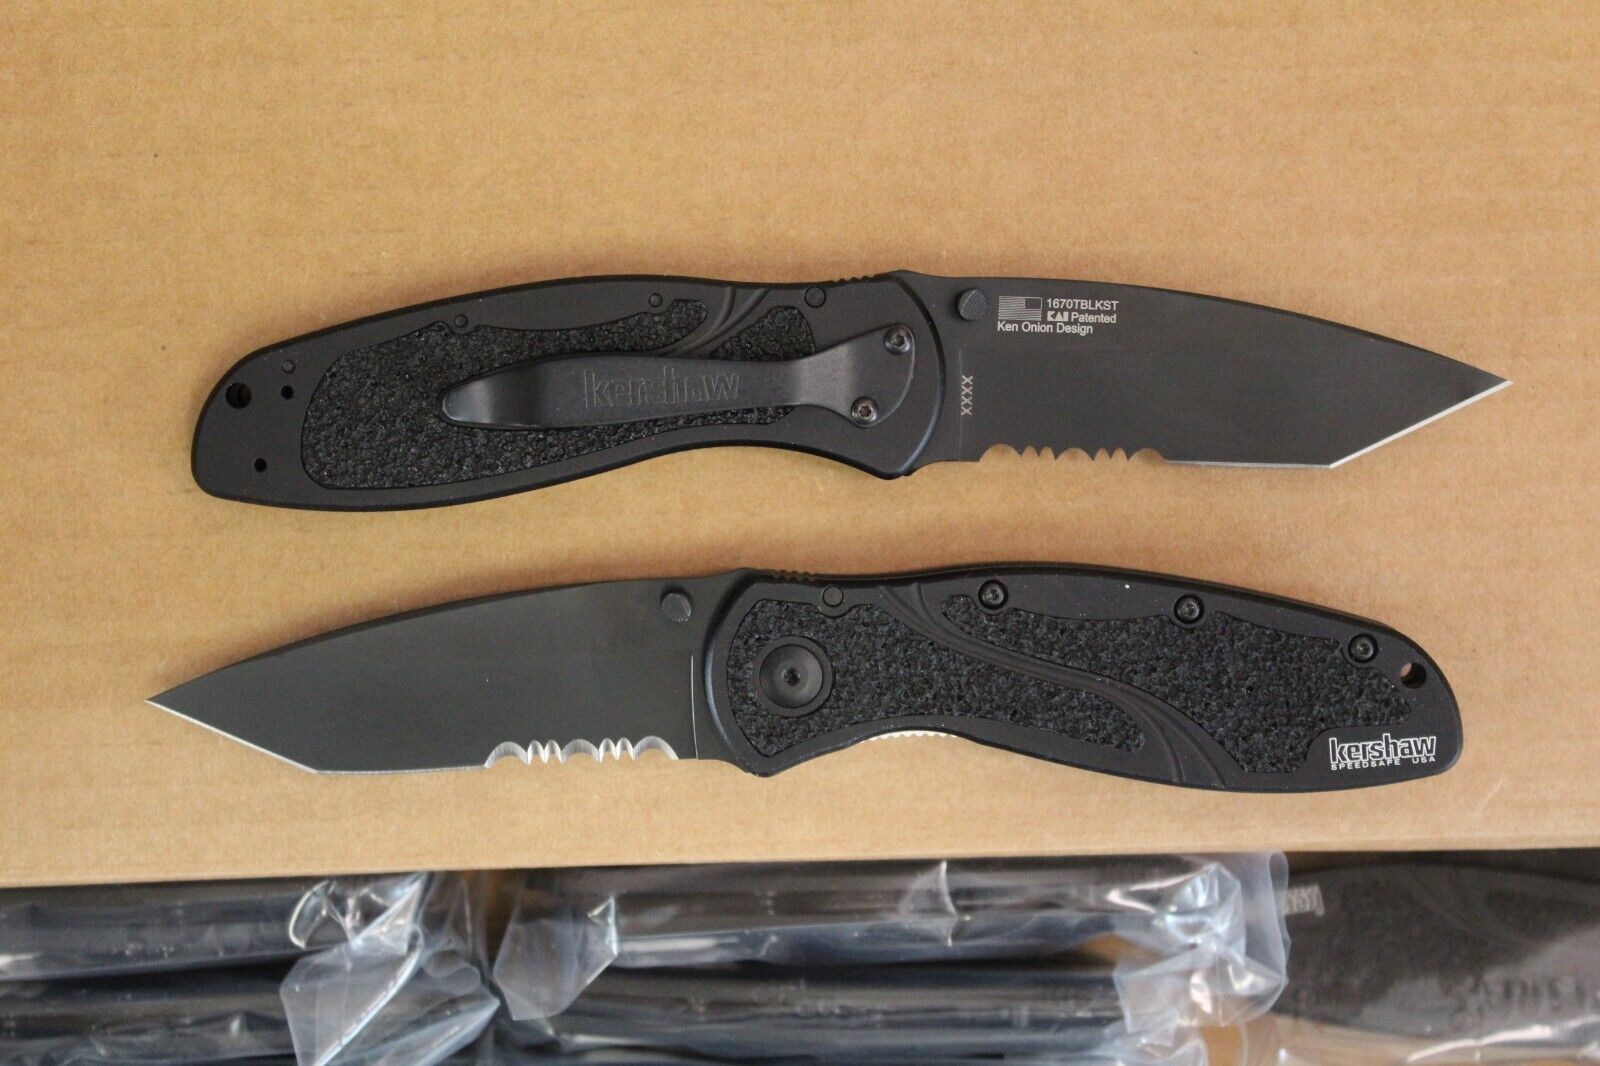 Kershaw 1670TBLKST Tanto Blur, Assisted Opening, Brand New Blem, Factory 2nd